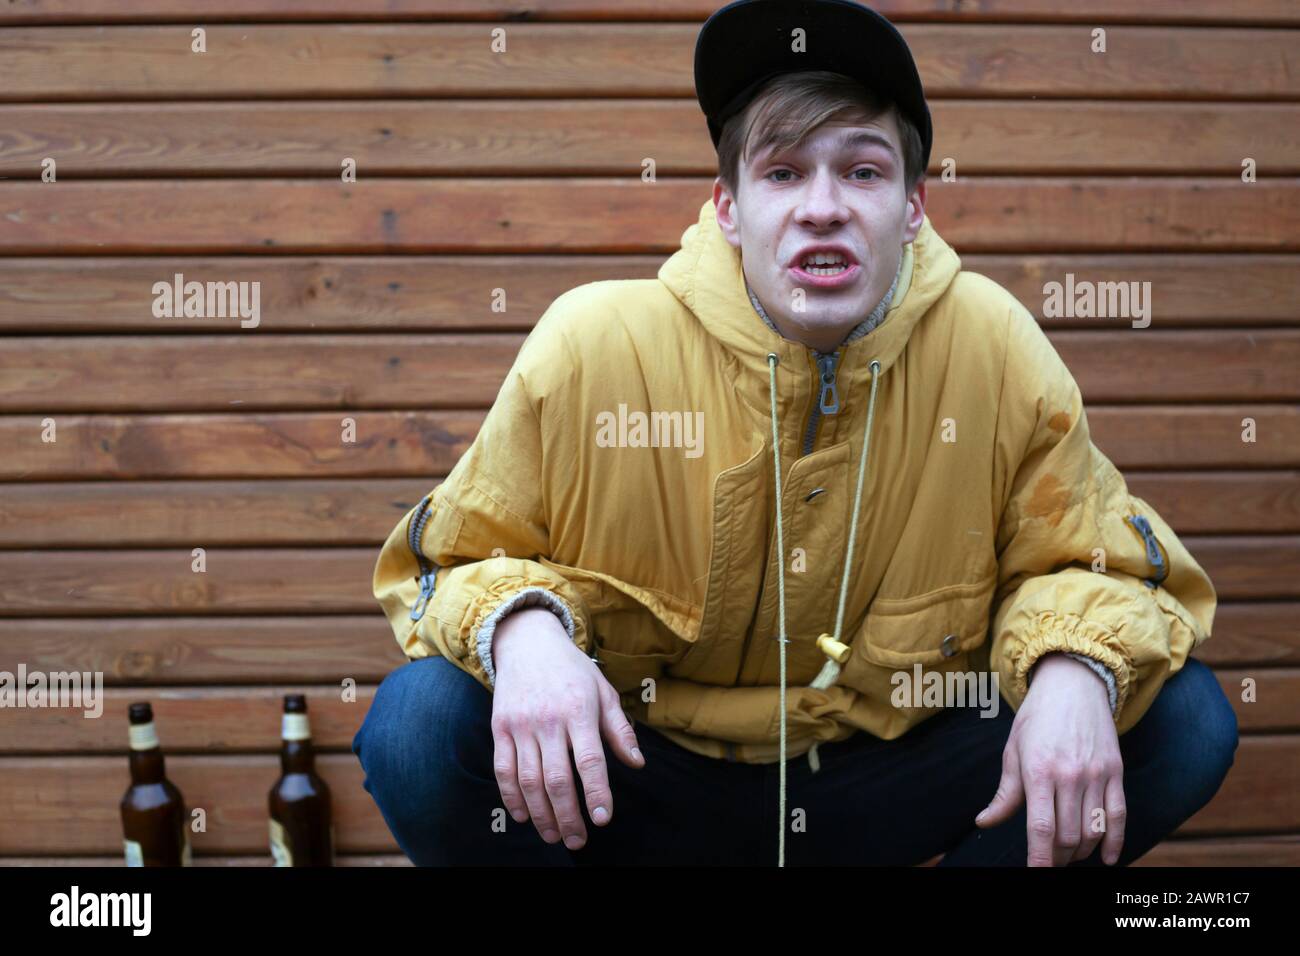 cheeky football fan got drunk beer. stylish young guy in a yellow jacket with an angry face swears. Stock Photo